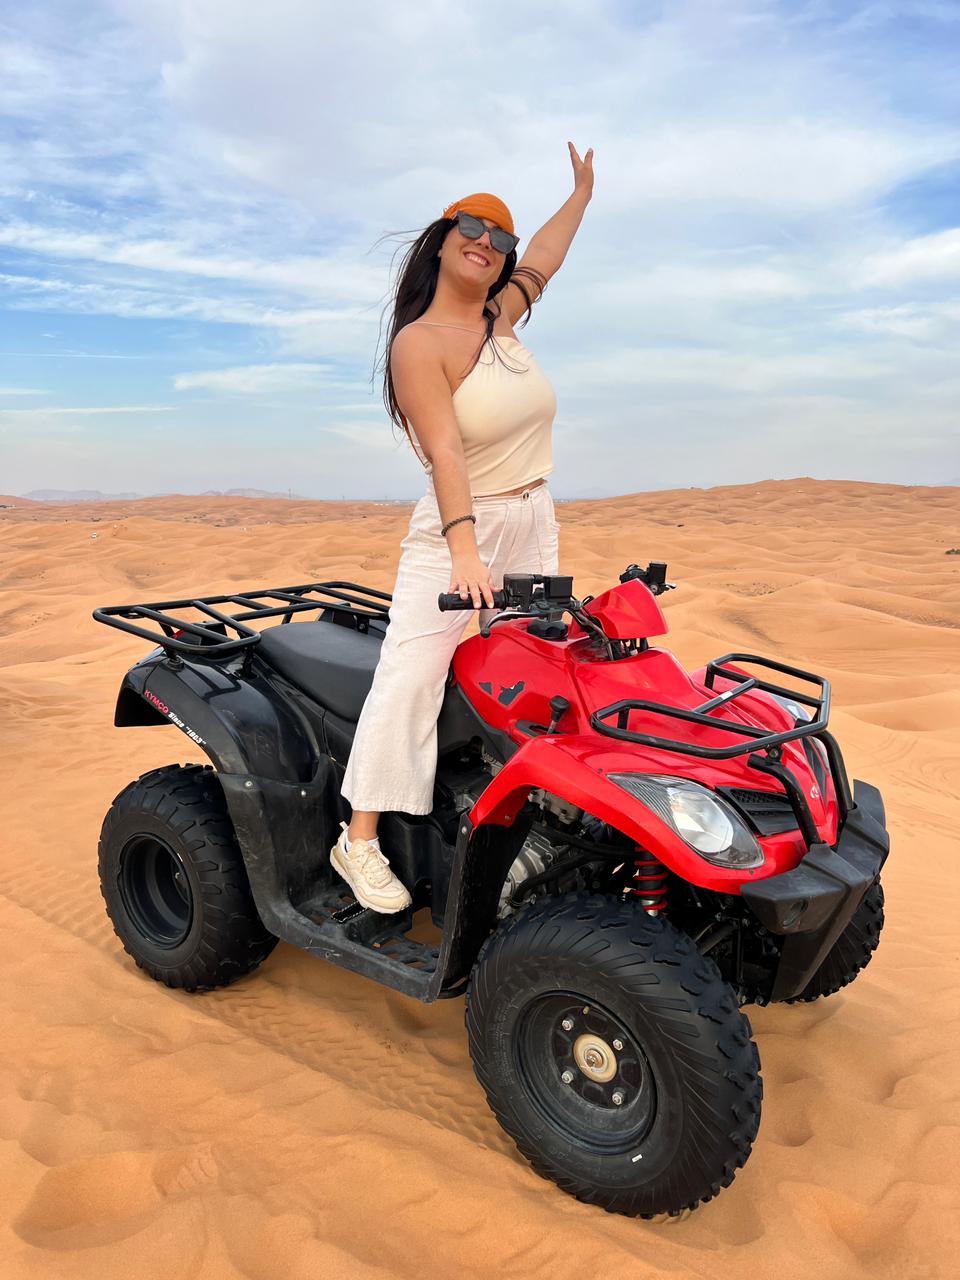 Private-evening-desert-safari-with-quad-bike-and-vip-seating